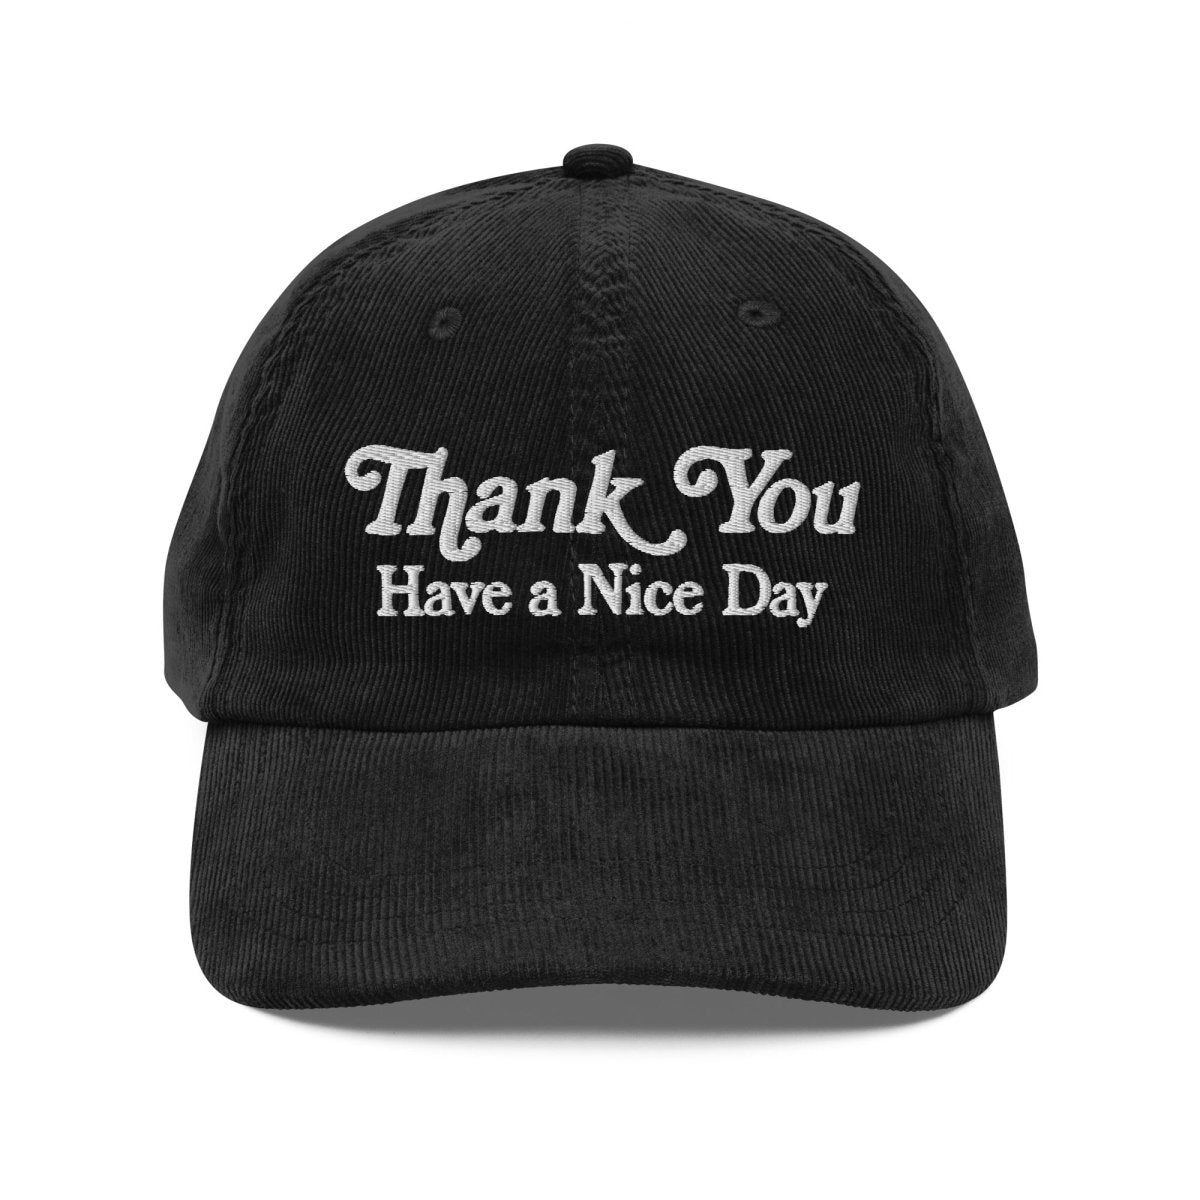 Thank you have a nice day corduroy cap - Pretty Bad Co.